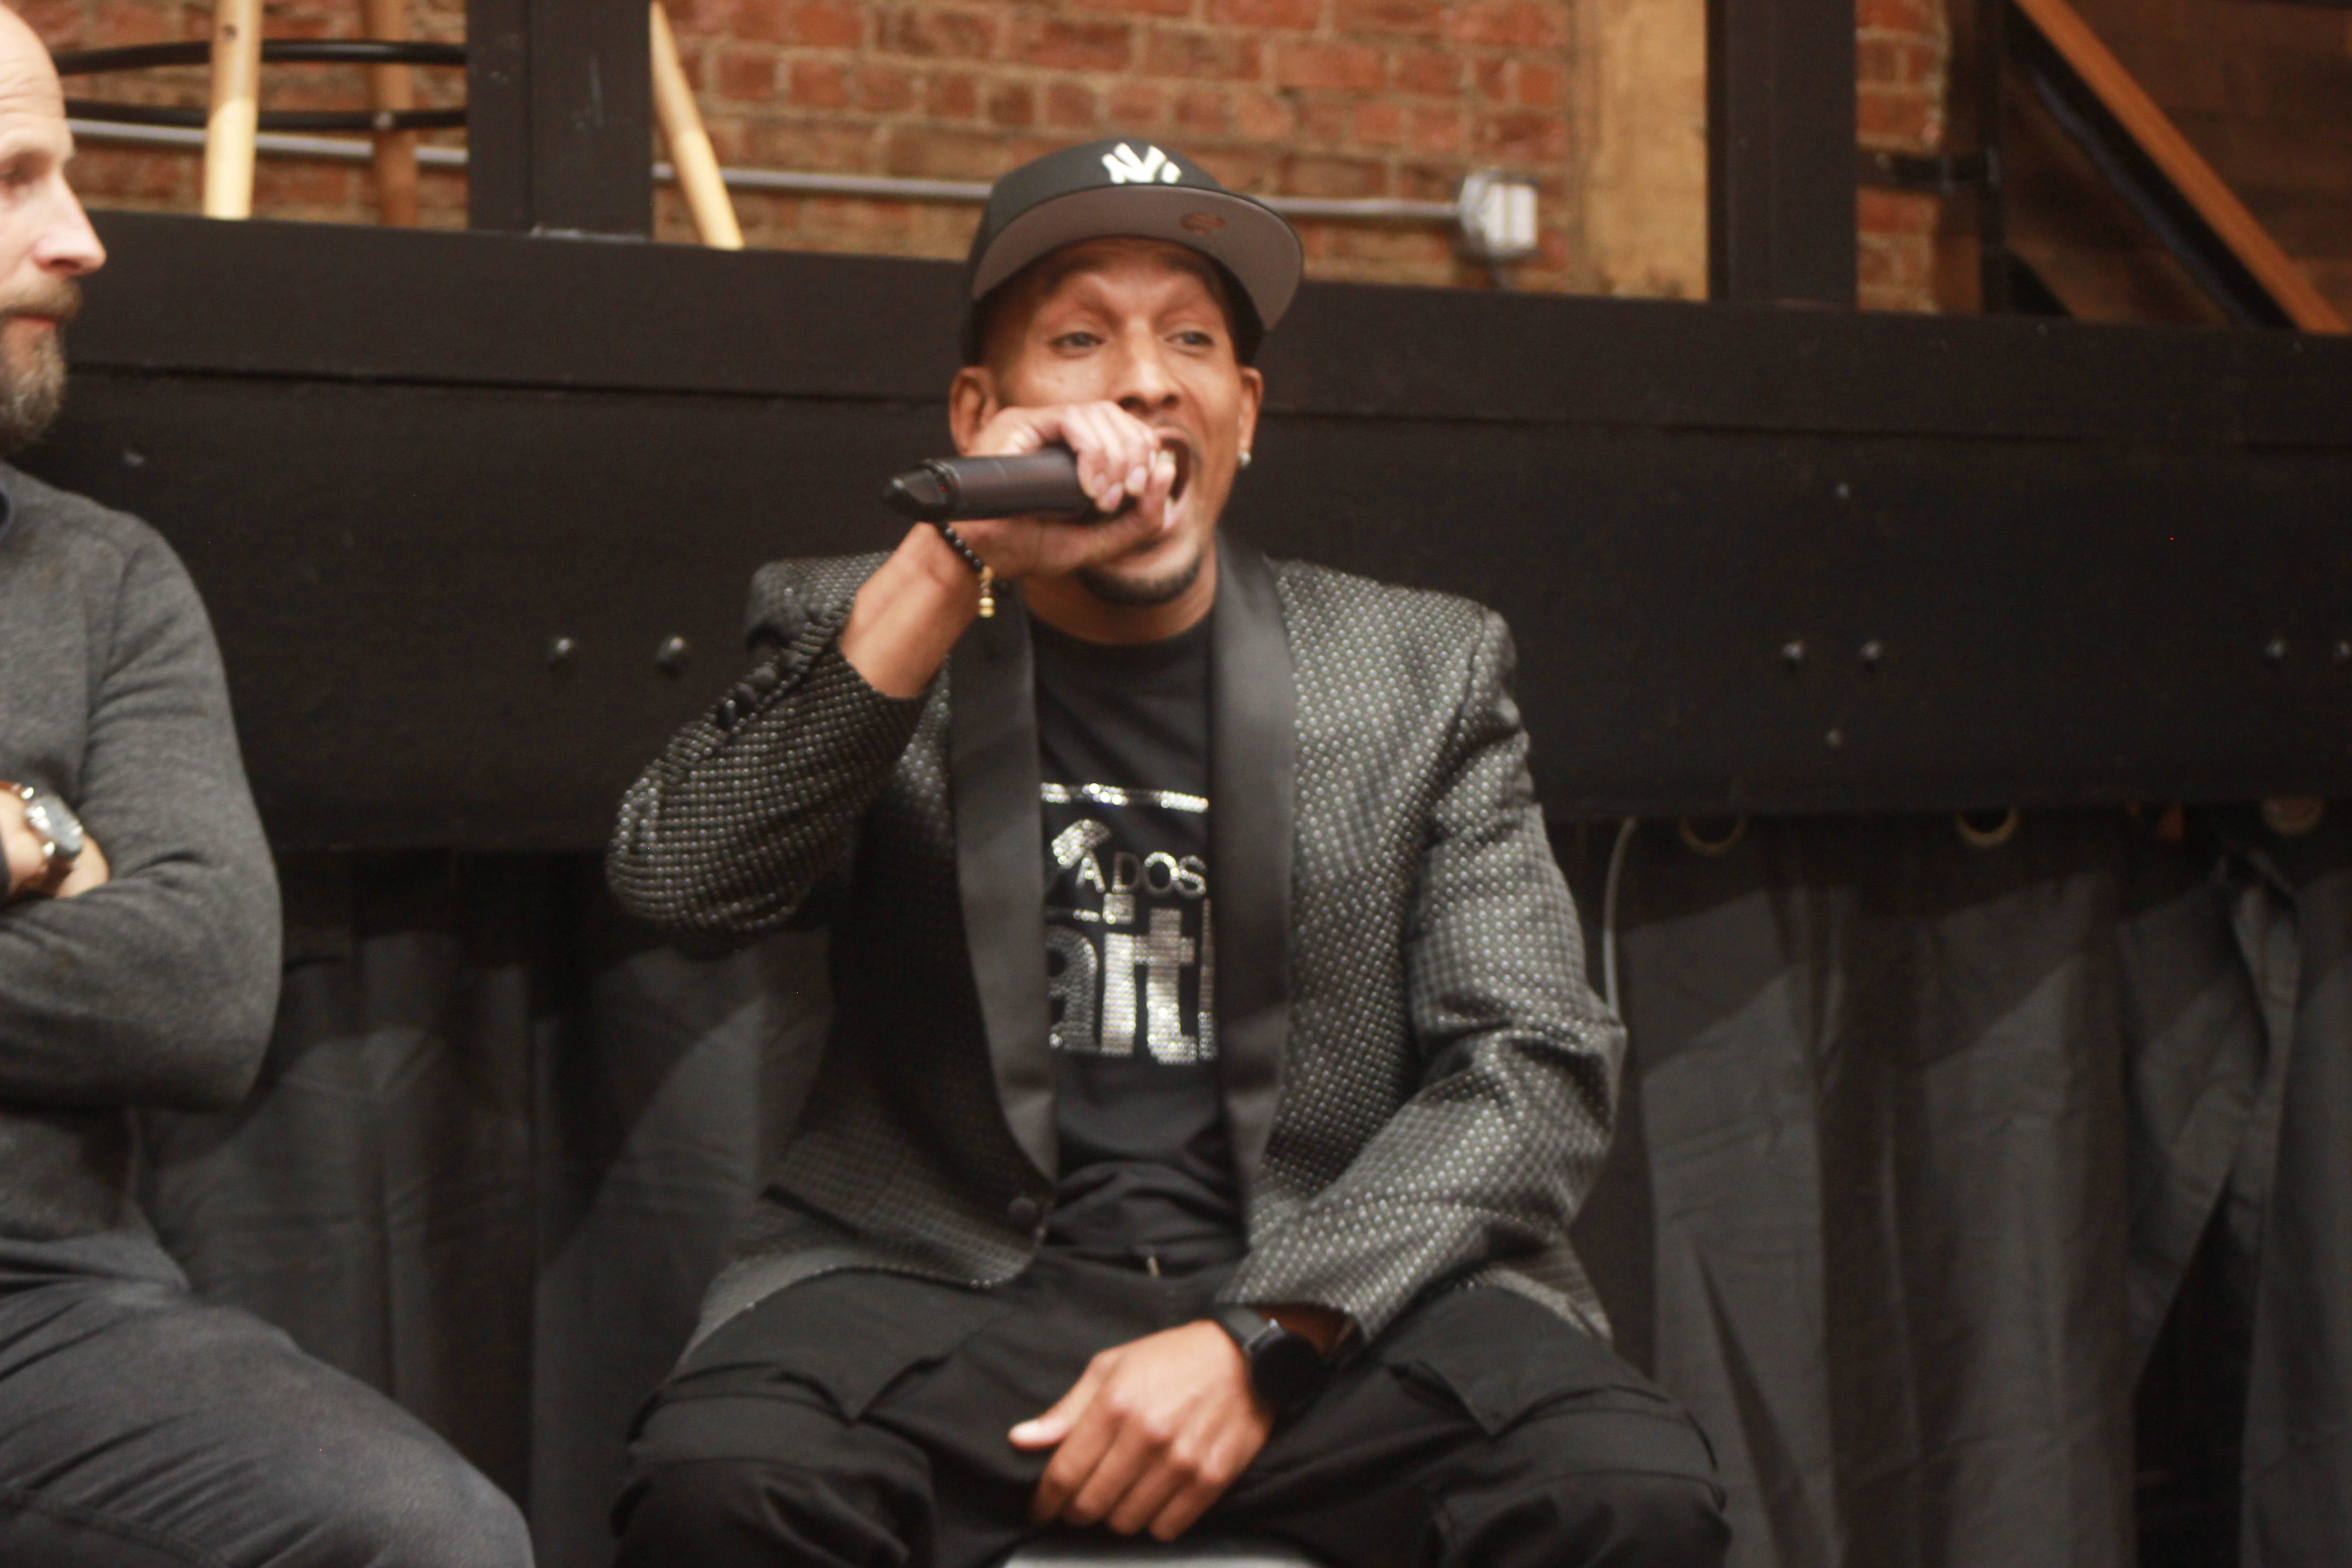 Crime + Punishment Brooklyn Tour Kicks Off With Guest Appearance by Korey Wise